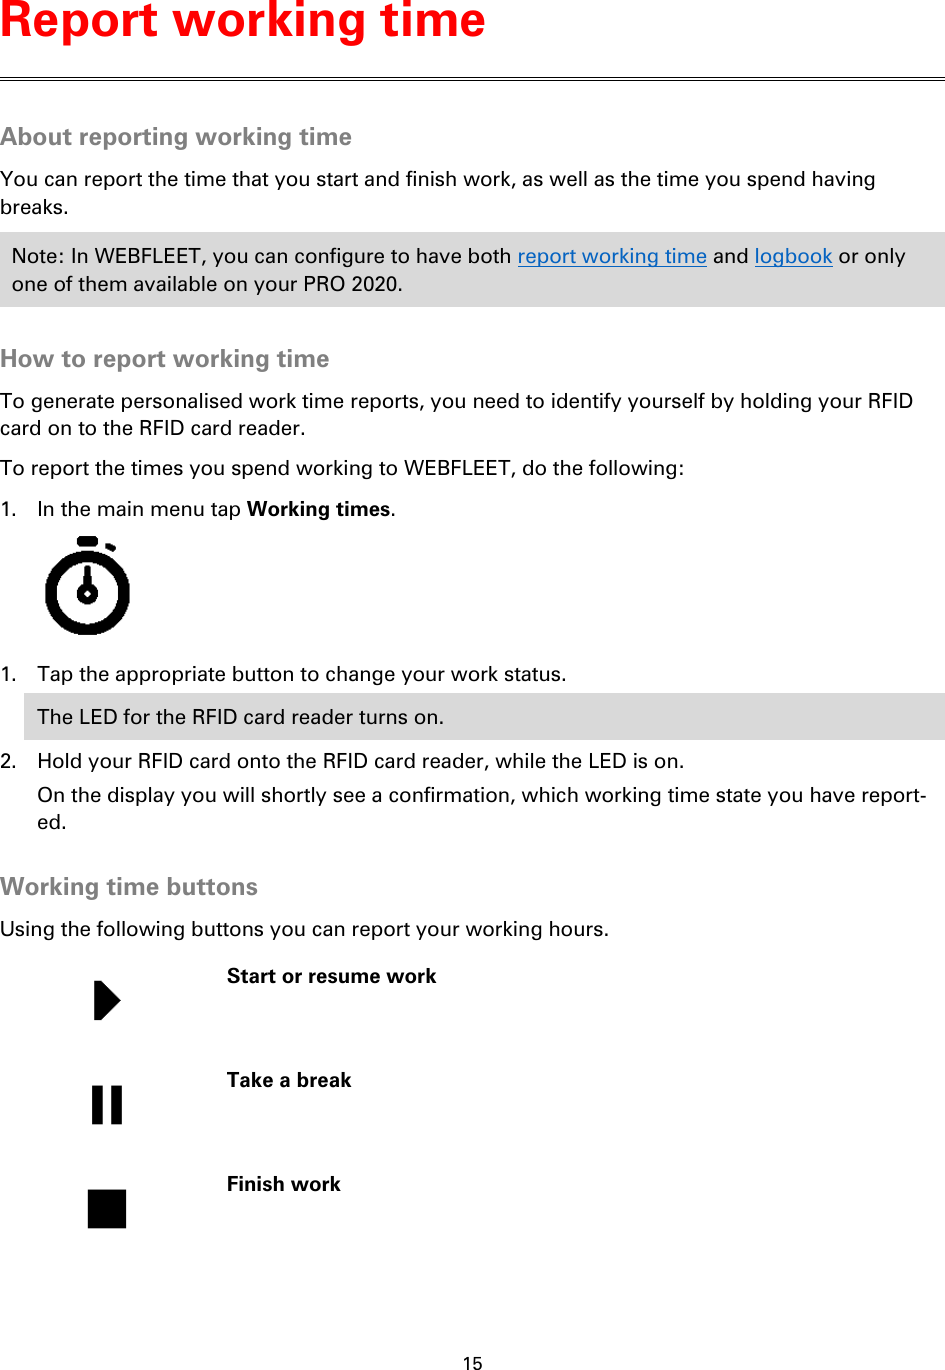 15    About reporting working time You can report the time that you start and finish work, as well as the time you spend having breaks. Note: In WEBFLEET, you can configure to have both report working time and logbook or only one of them available on your PRO 2020.  How to report working time To generate personalised work time reports, you need to identify yourself by holding your RFID card on to the RFID card reader. To report the times you spend working to WEBFLEET, do the following: 1. In the main menu tap Working times.  1. Tap the appropriate button to change your work status. The LED for the RFID card reader turns on. 2. Hold your RFID card onto the RFID card reader, while the LED is on. On the display you will shortly see a confirmation, which working time state you have report-ed.  Working time buttons Using the following buttons you can report your working hours.   Start or resume work   Take a break   Finish work  Report working time 